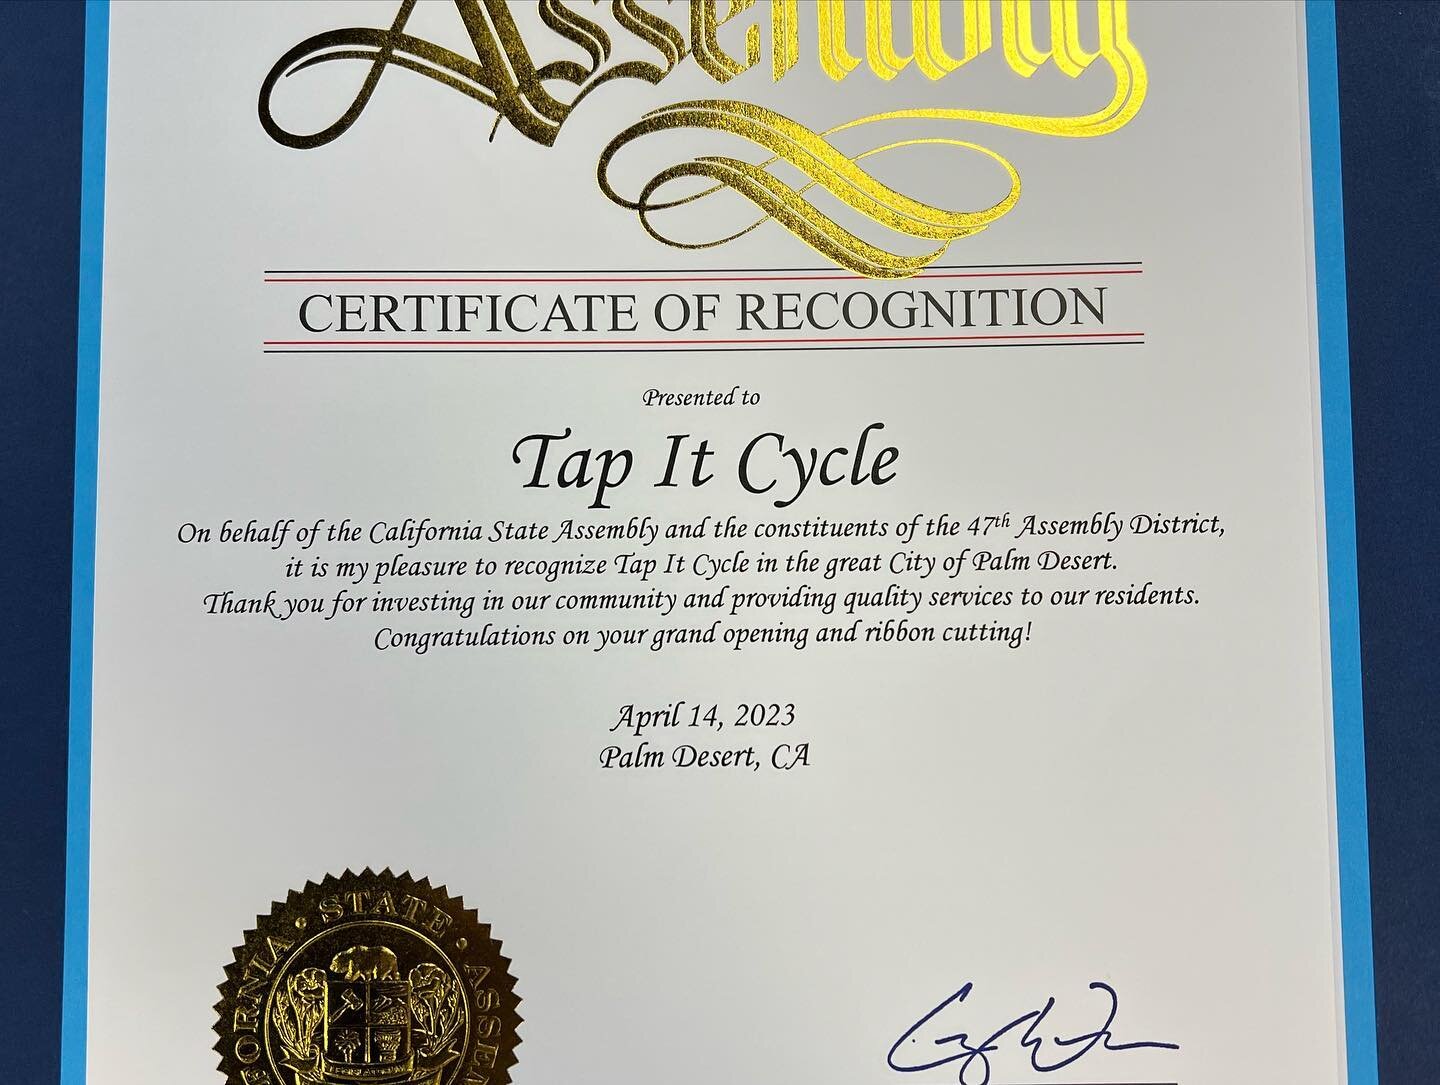 Thank you to the City of Palm Desert for the recognition and support of TAP IT CYCLE 🙏🏼💛 #palmdesert #love #community #palmdesertlife #palmdesertfitness #fitness #business #smallbusiness #support #localbusiness #thankyou